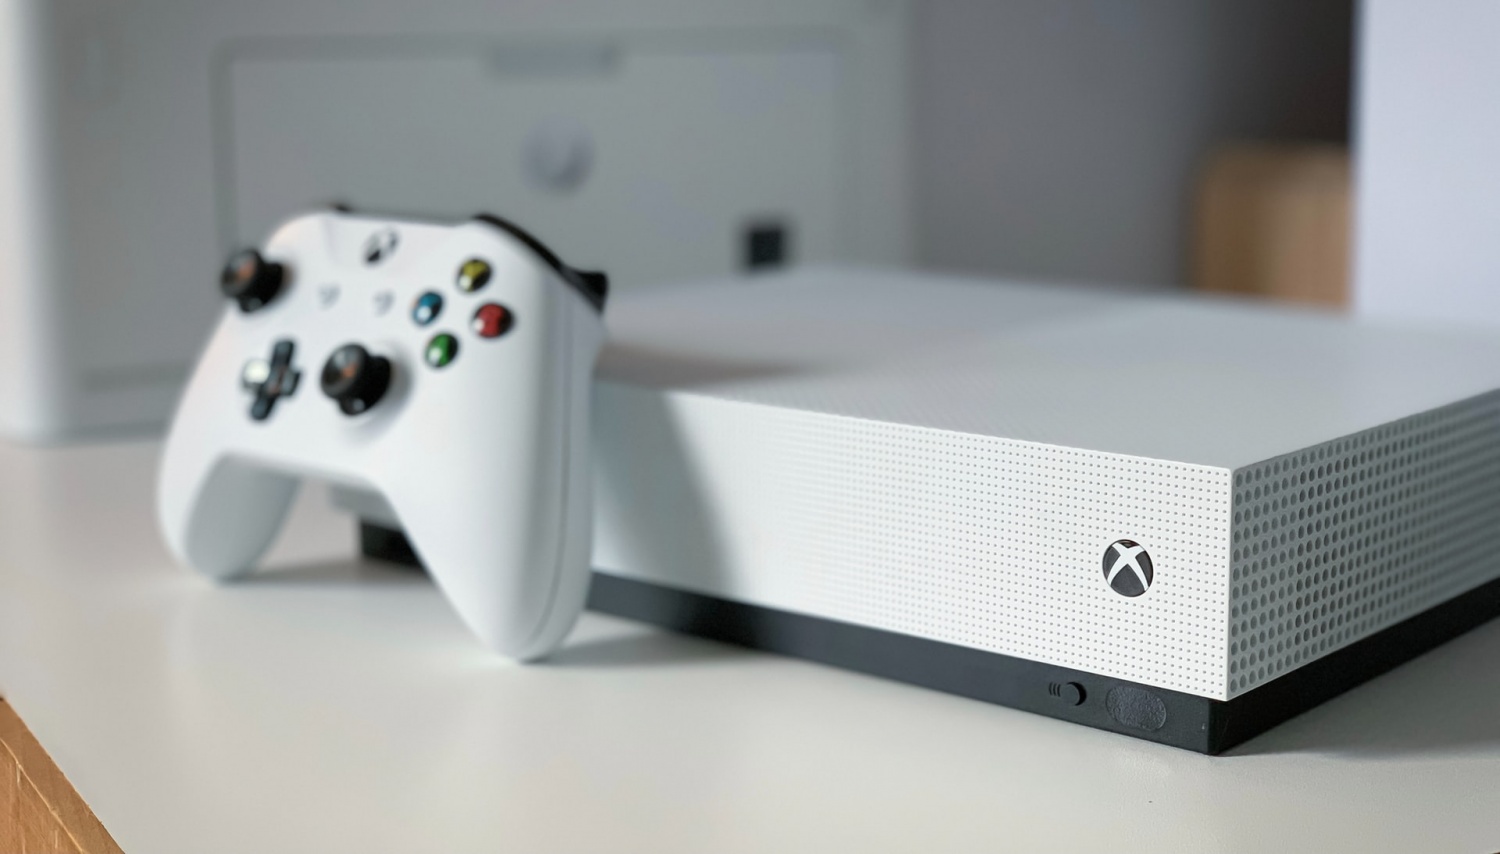 Xbox Series X vs. Series S: Hardware, Performance and Other Differences — Which Should You Buy?